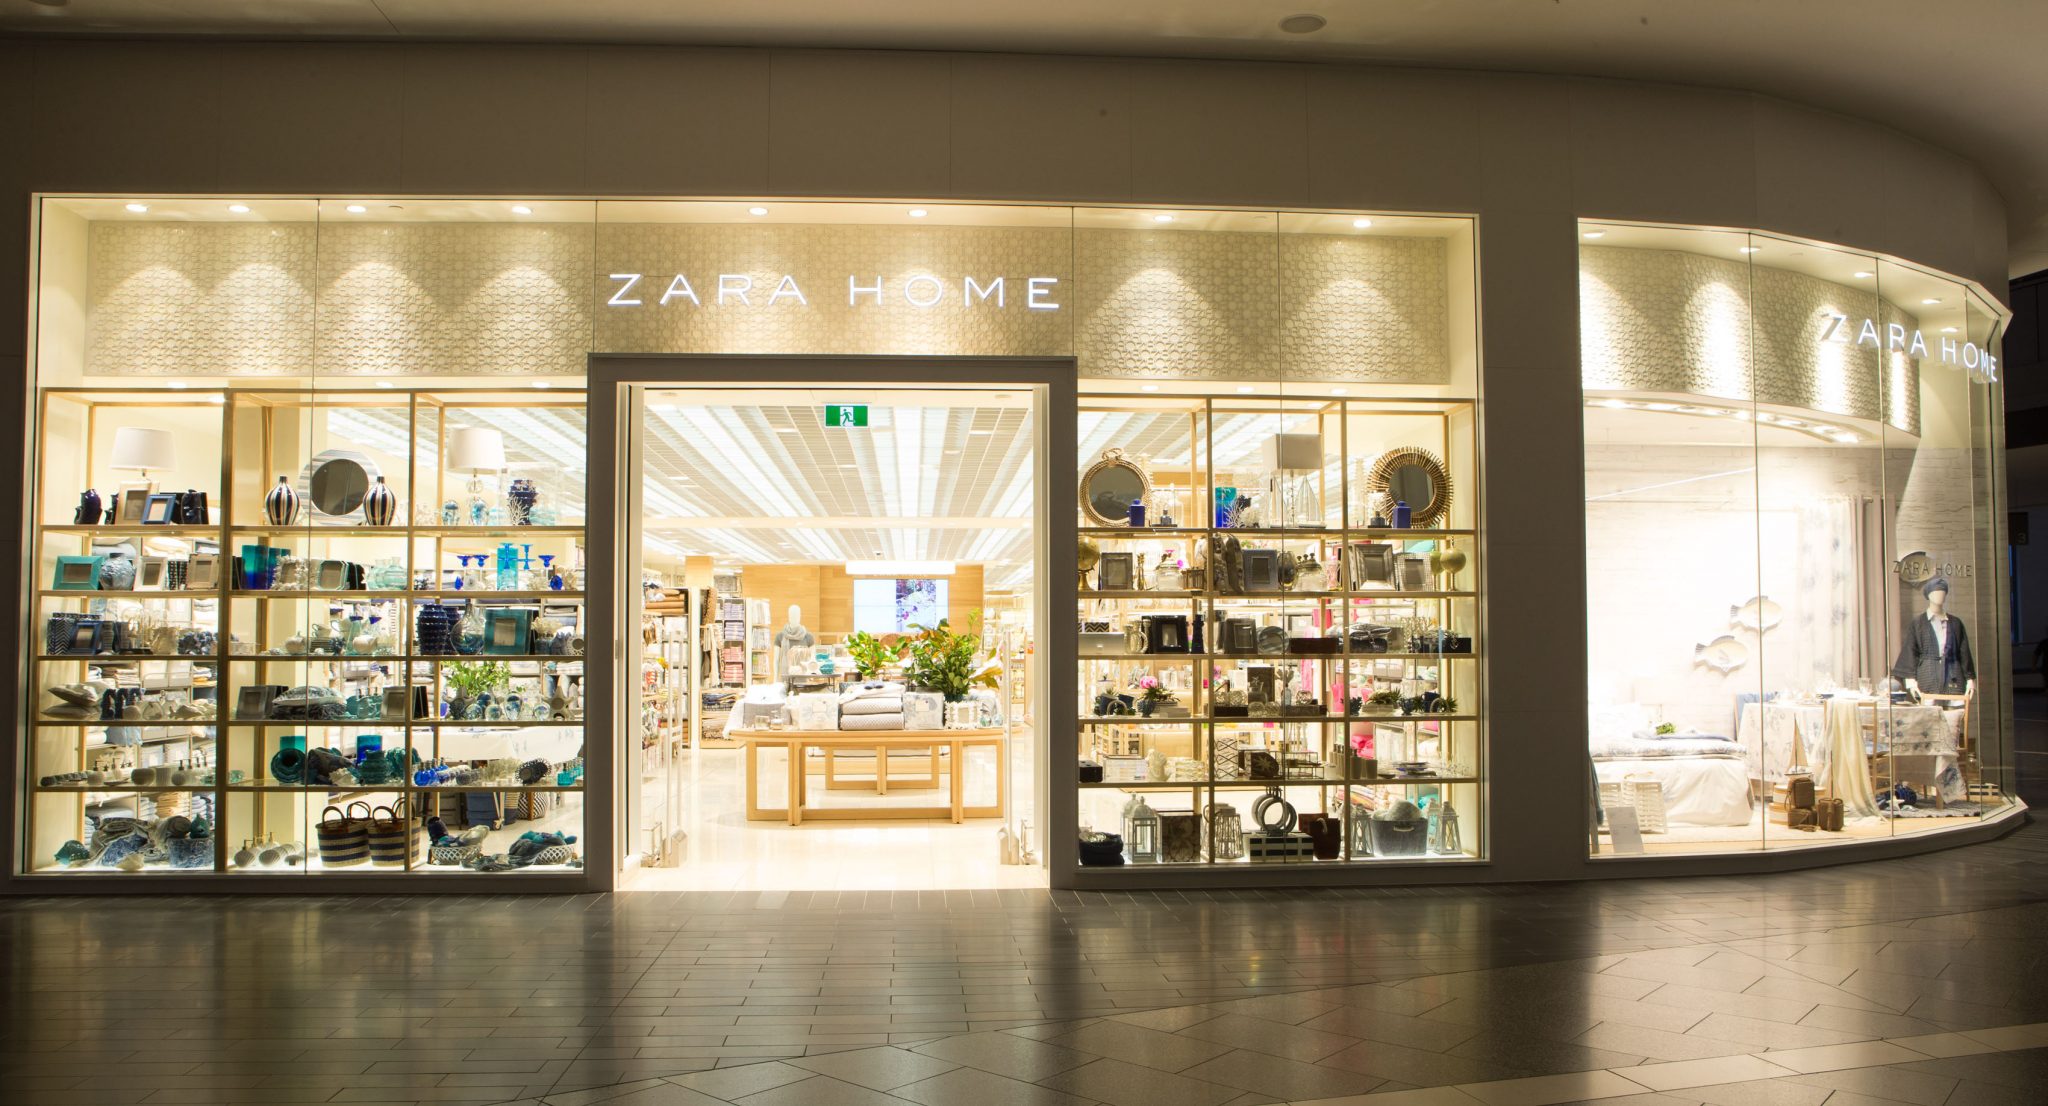 Zara Home opened in Melbourne today - The Interiors Addict